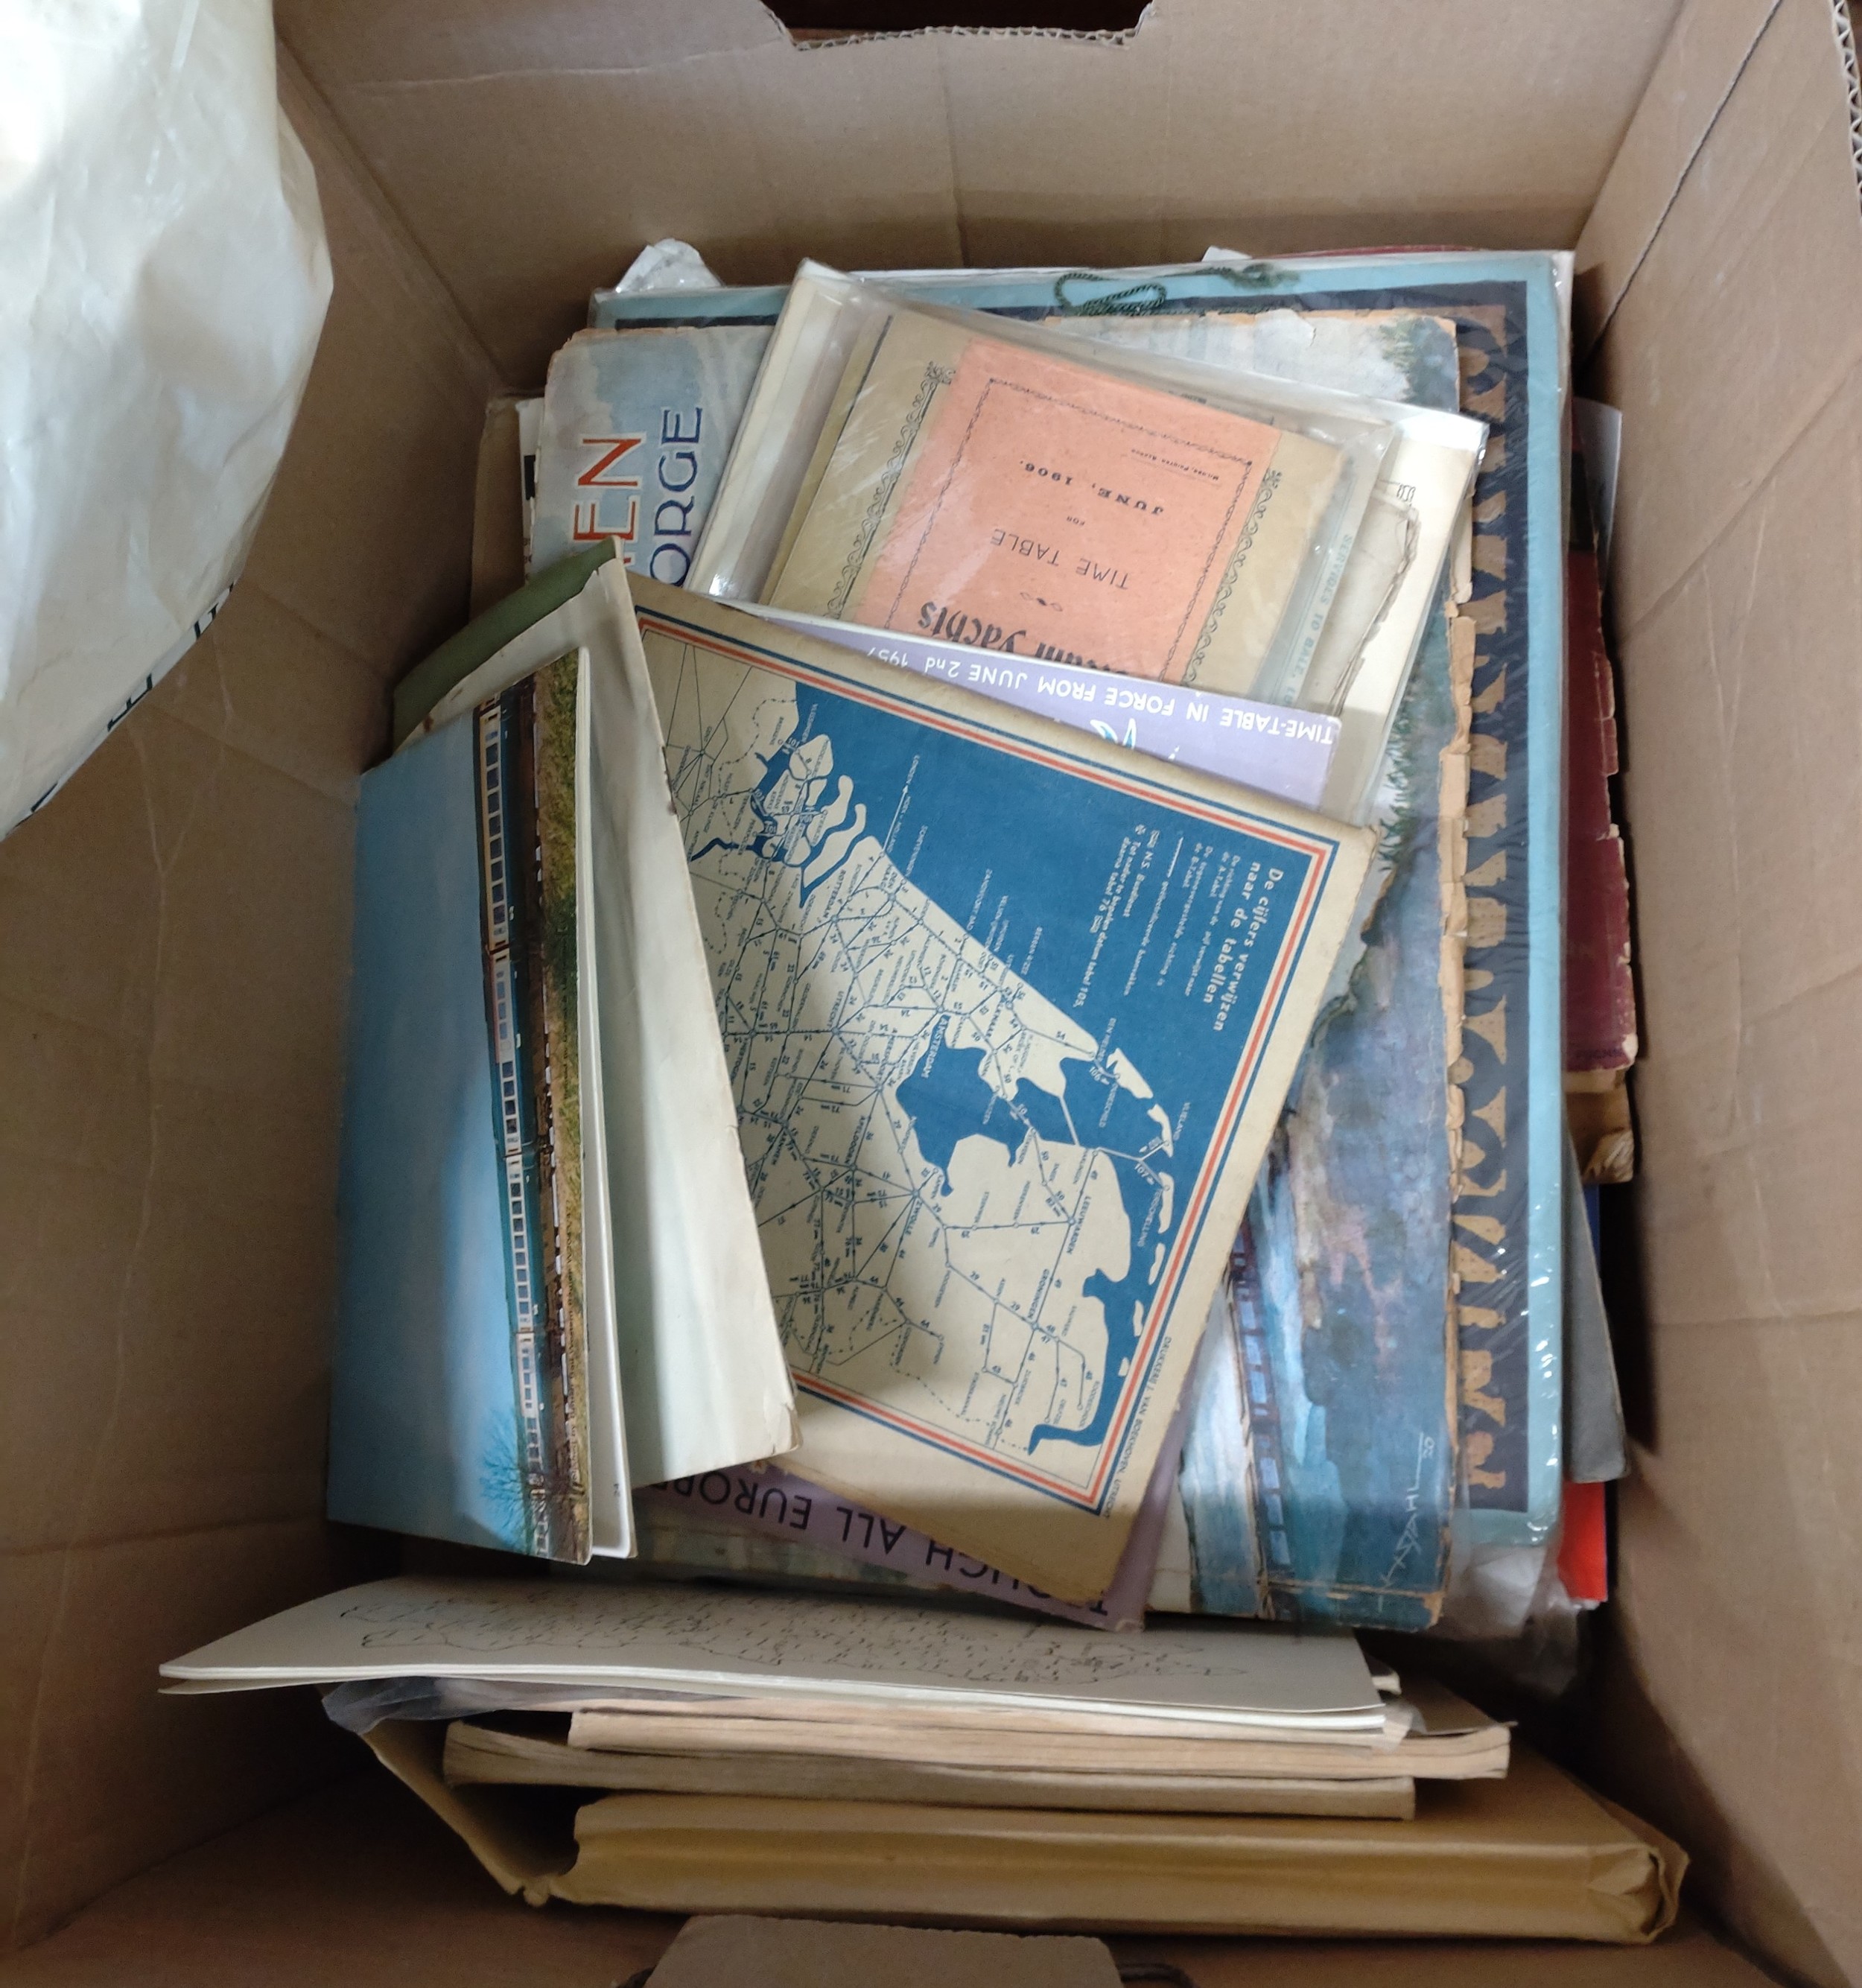 A quantity of books, leaflets and pamphlets on railways